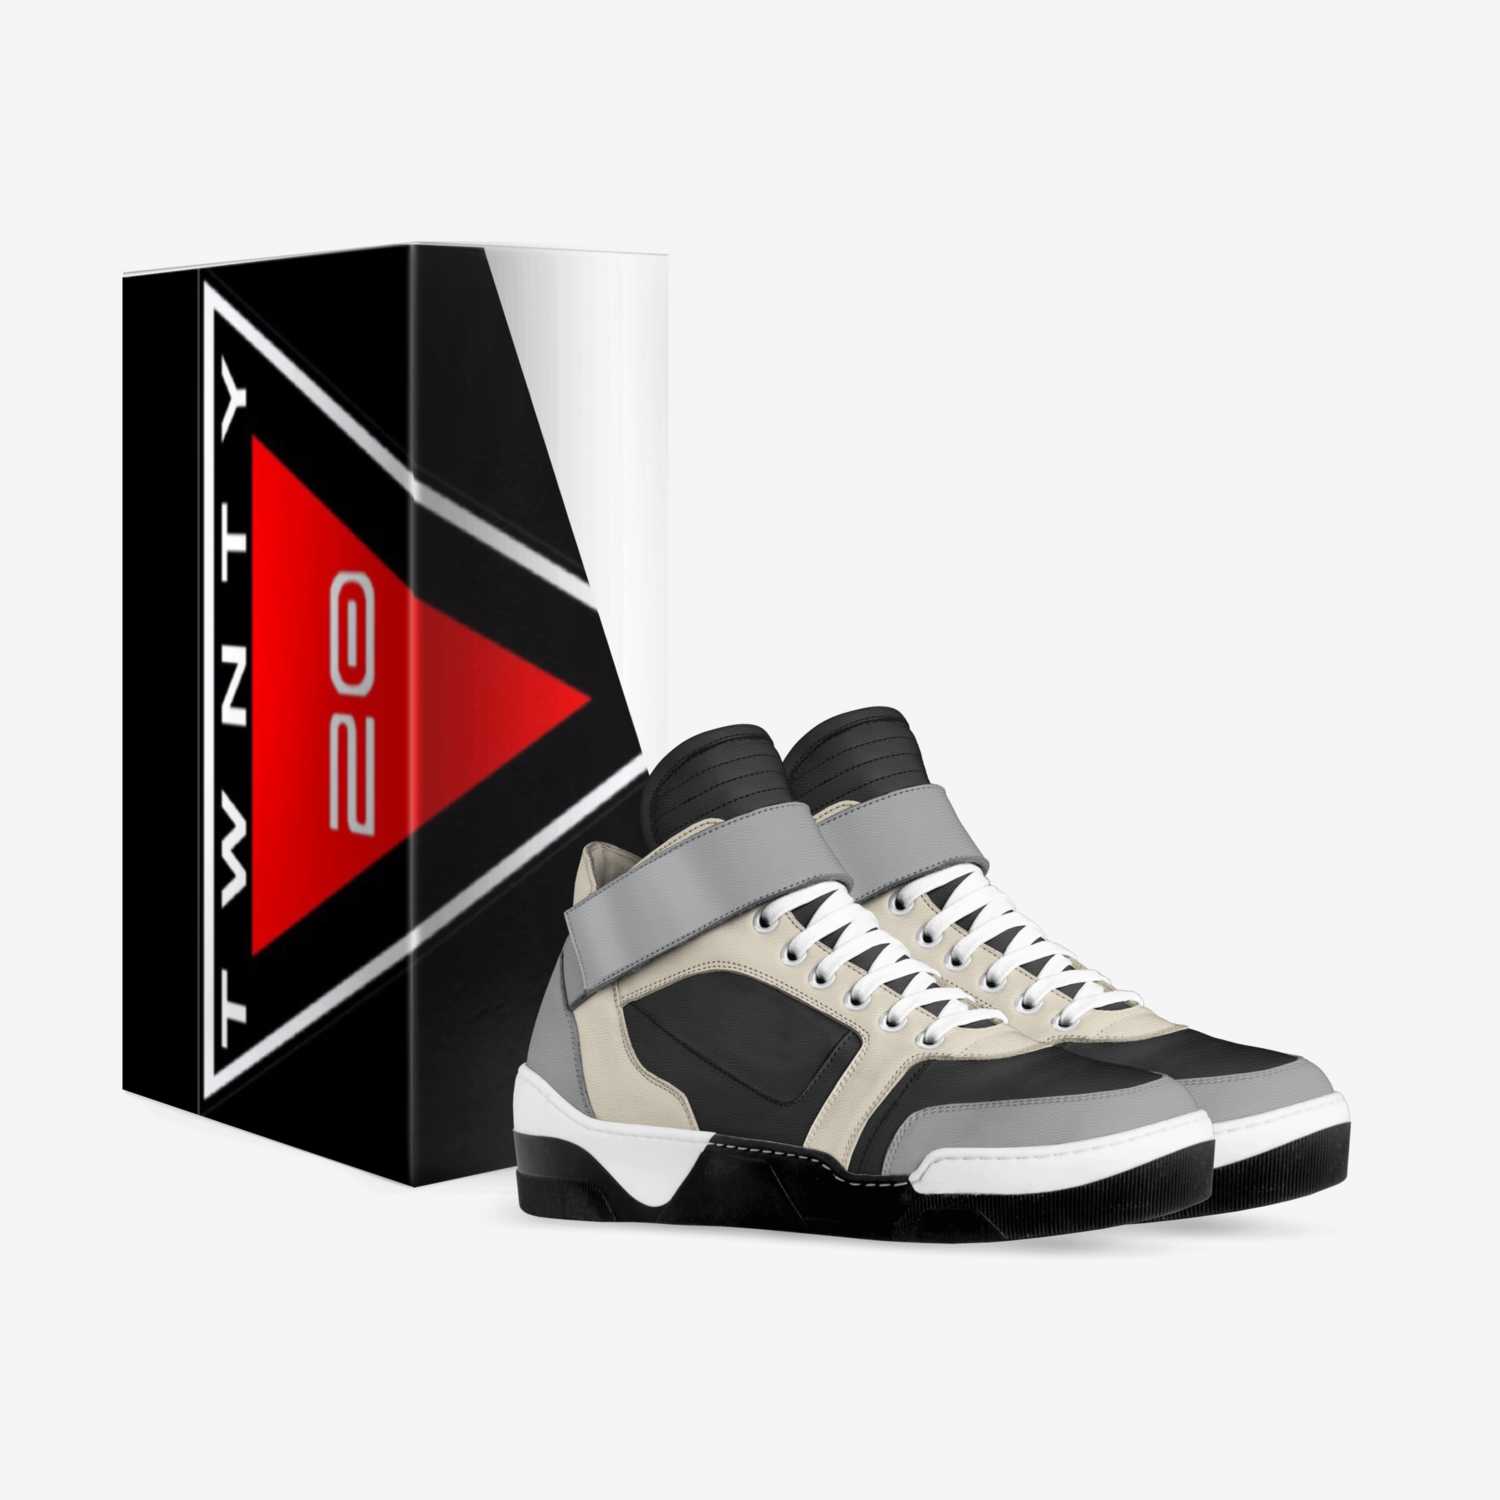 LXR 320 custom made in Italy shoes by Kvn Elvn | Box view